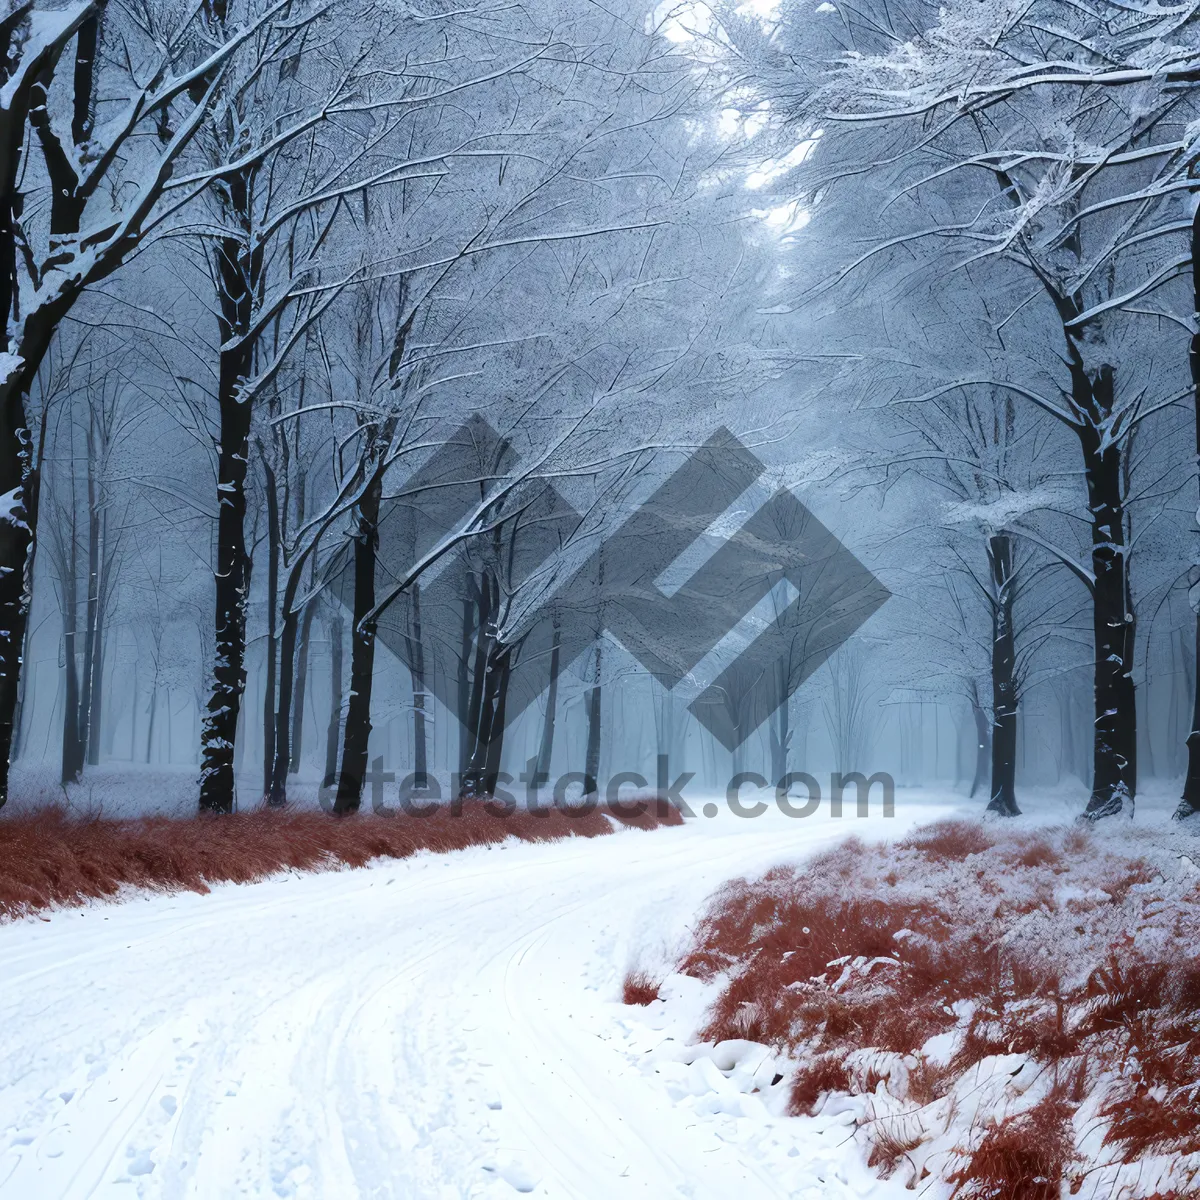 Picture of Winter Wonderland: Majestic snowy forest landscape